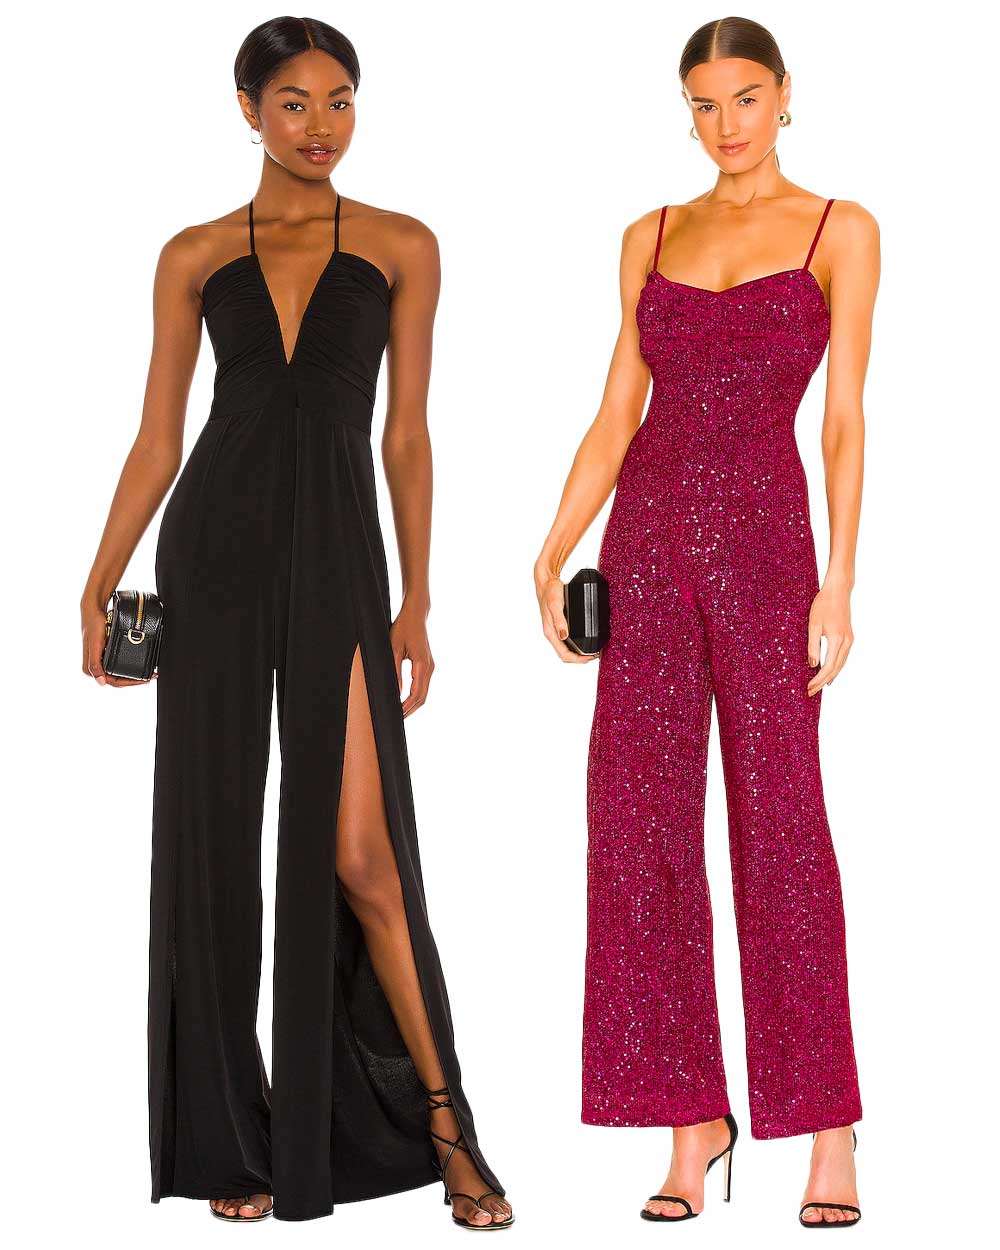 Jumpsuits for cocktail attire for women